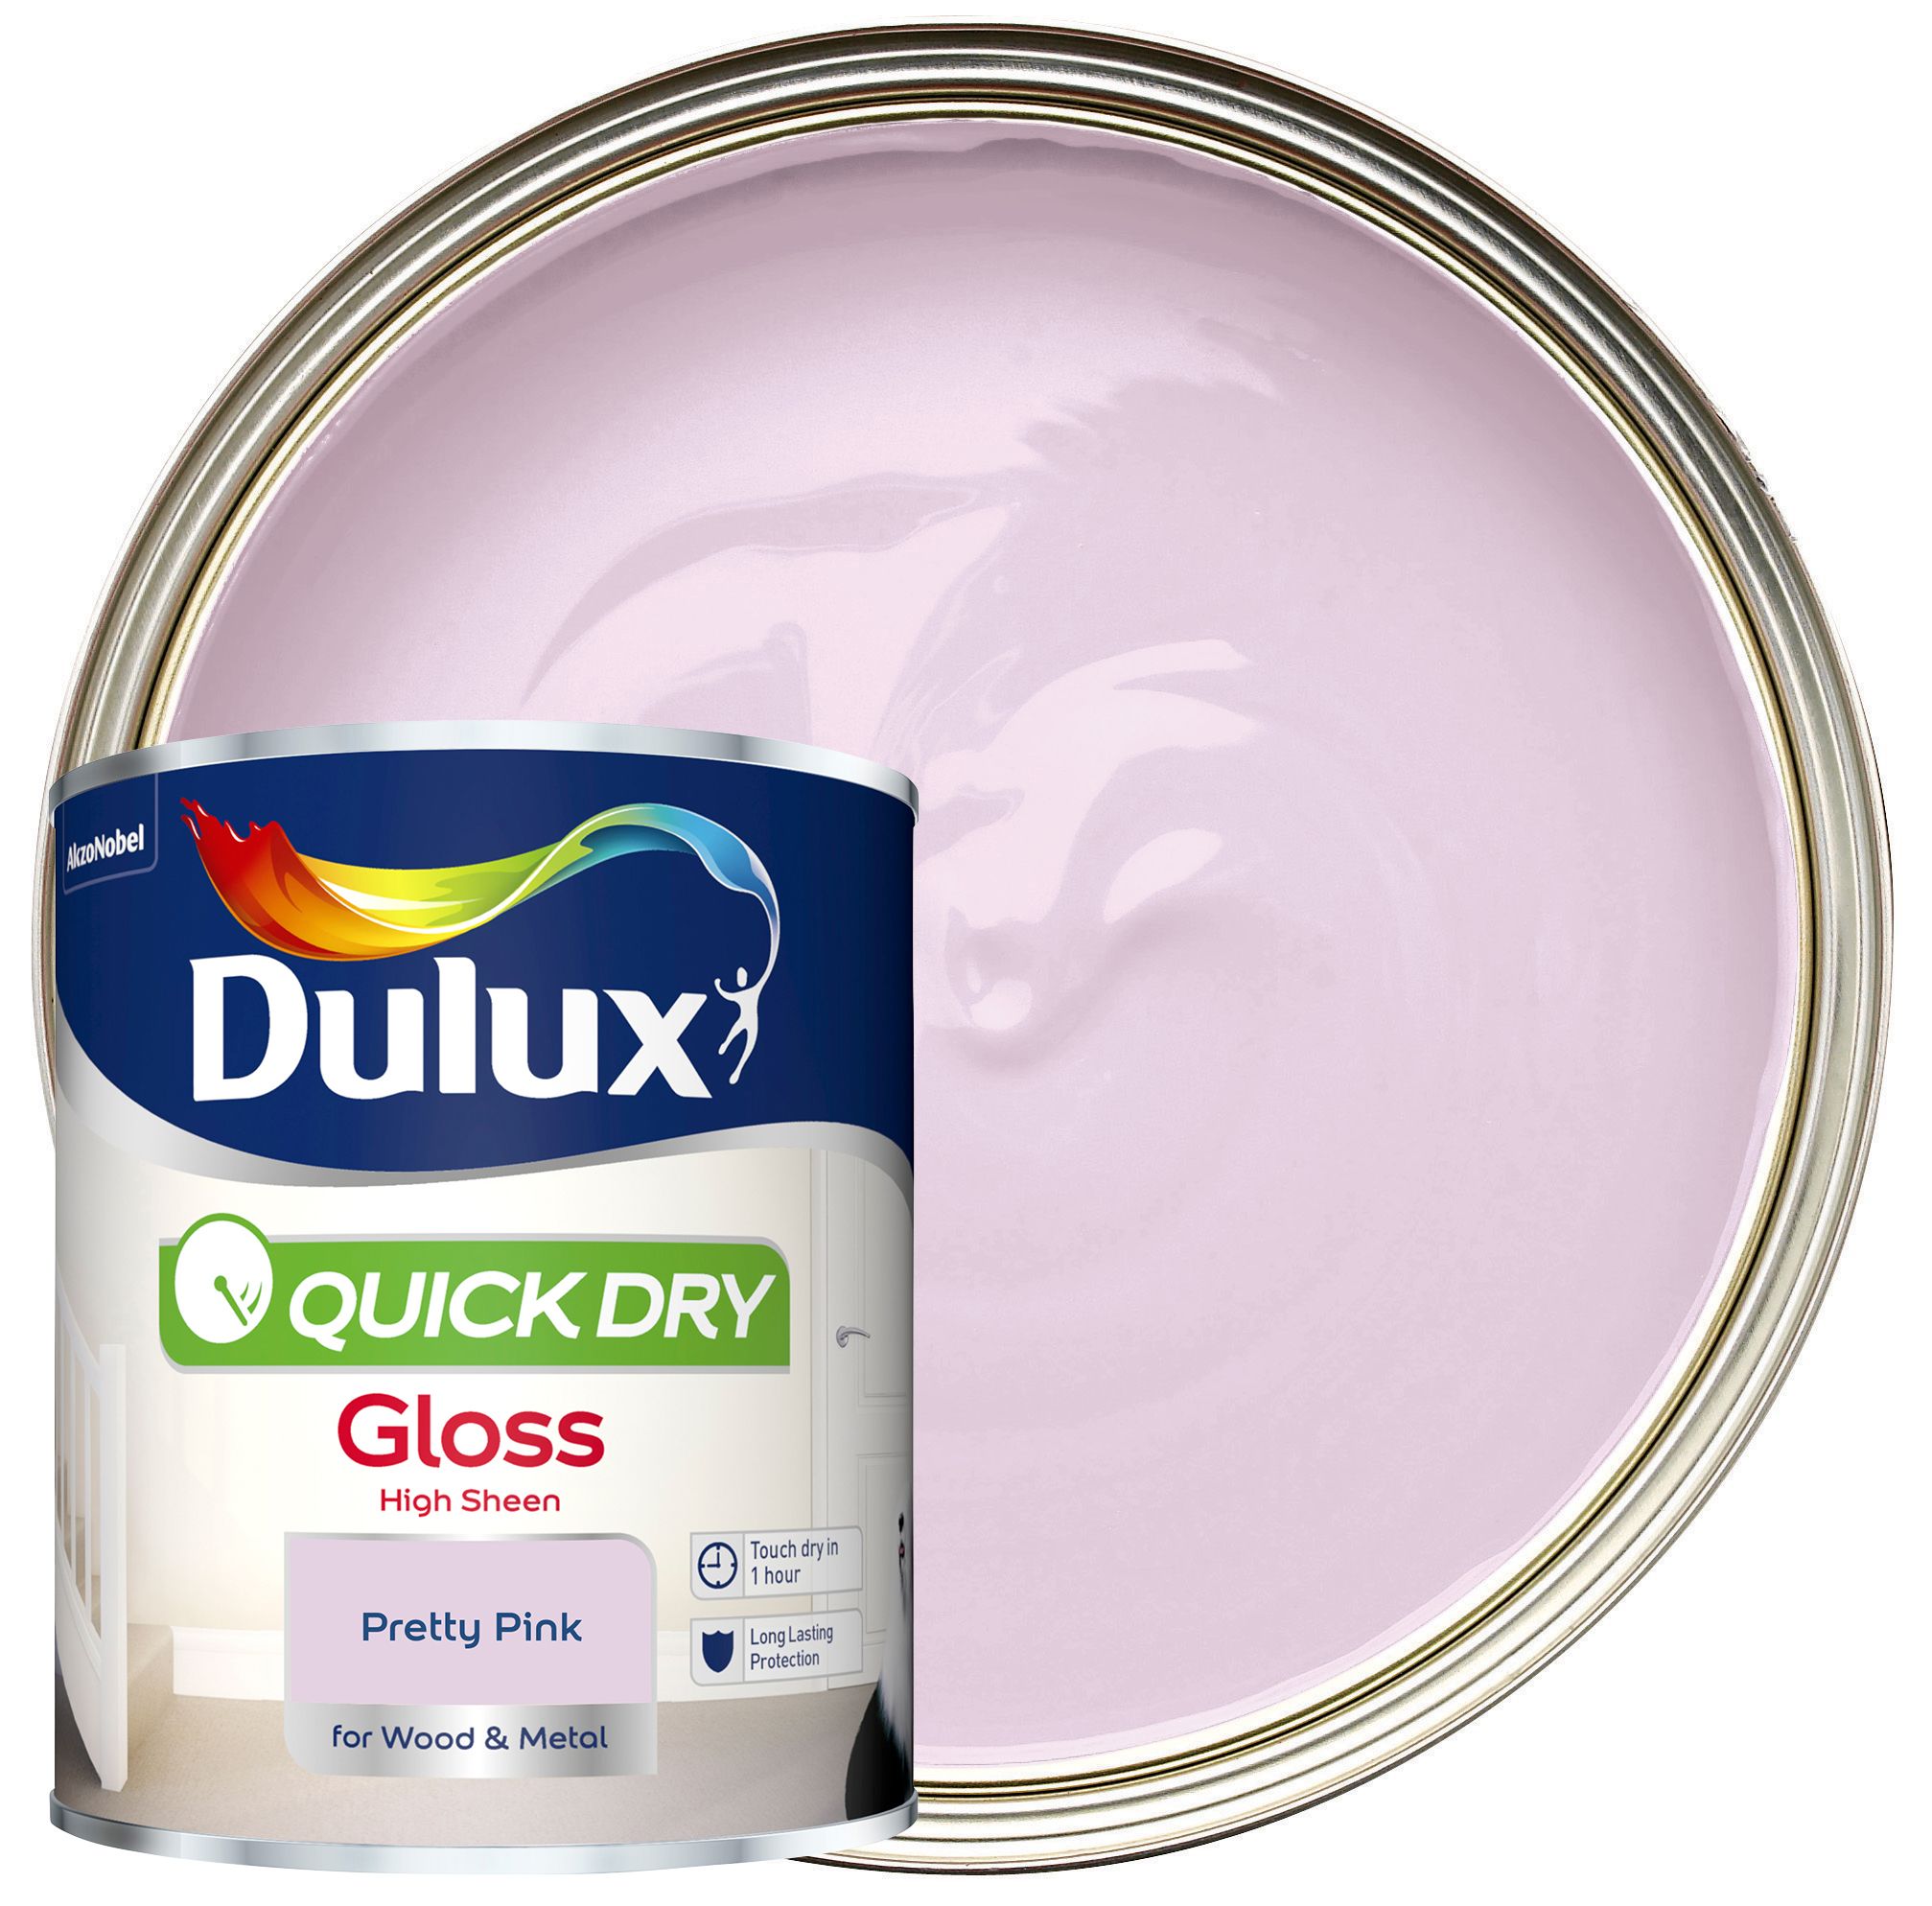 Image of Dulux Quick Drying Gloss Paint - Pretty Pink - 750ml